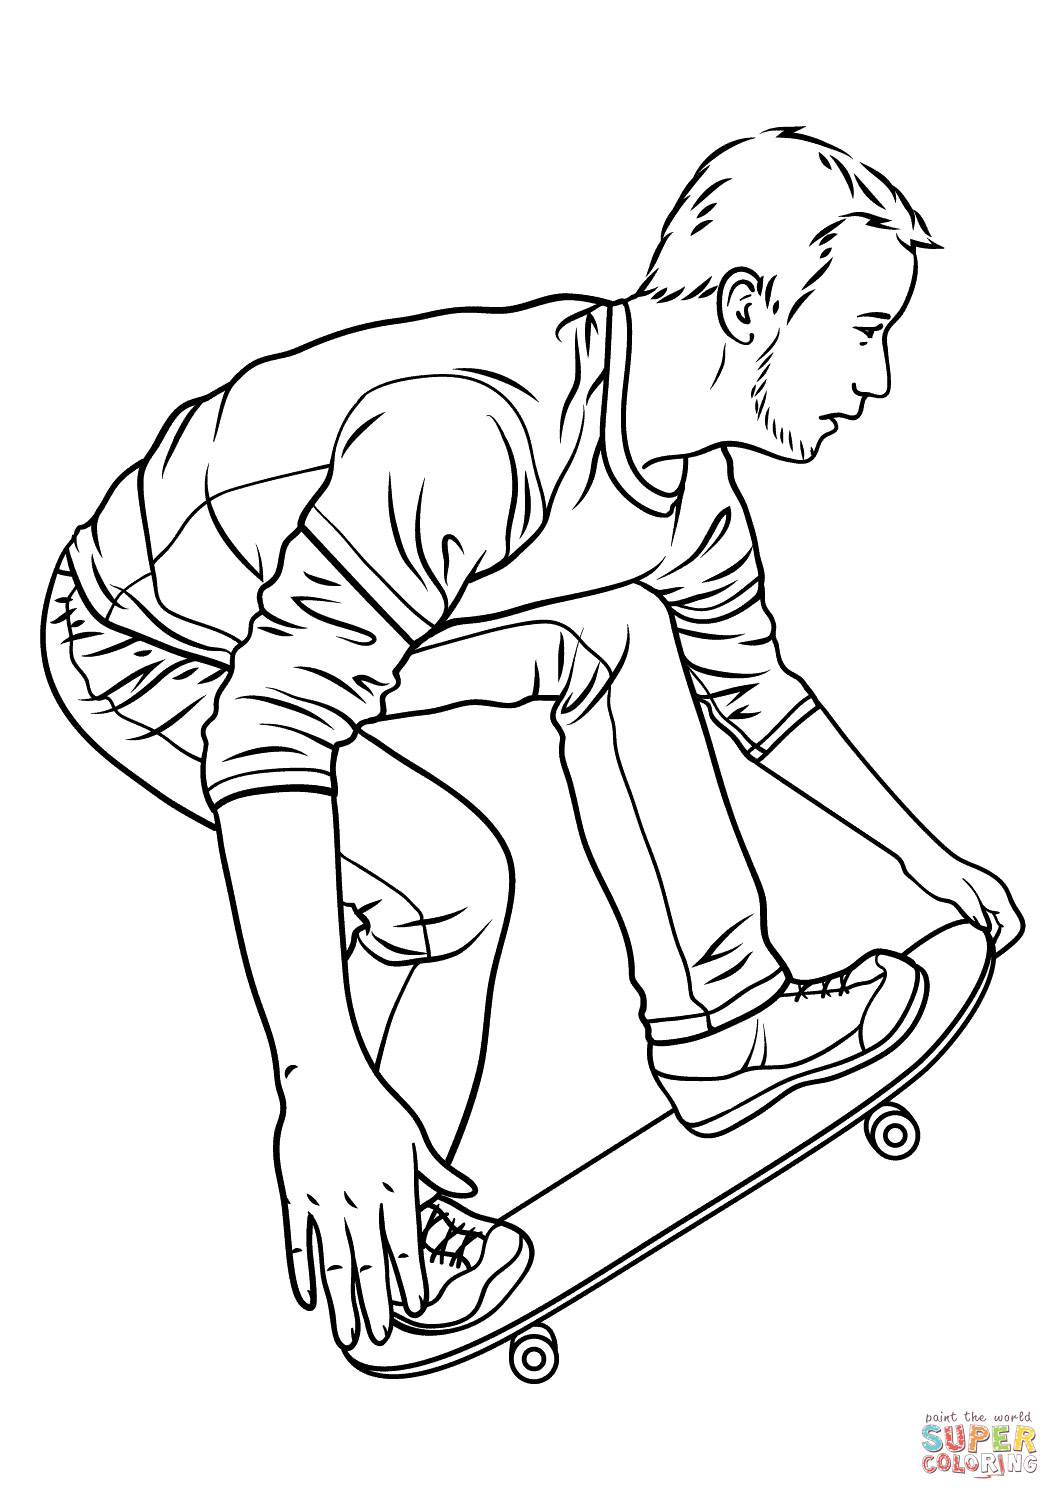 Coloring Sheets For Boys Hawk
 Skateboard clipart coloring page Pencil and in color